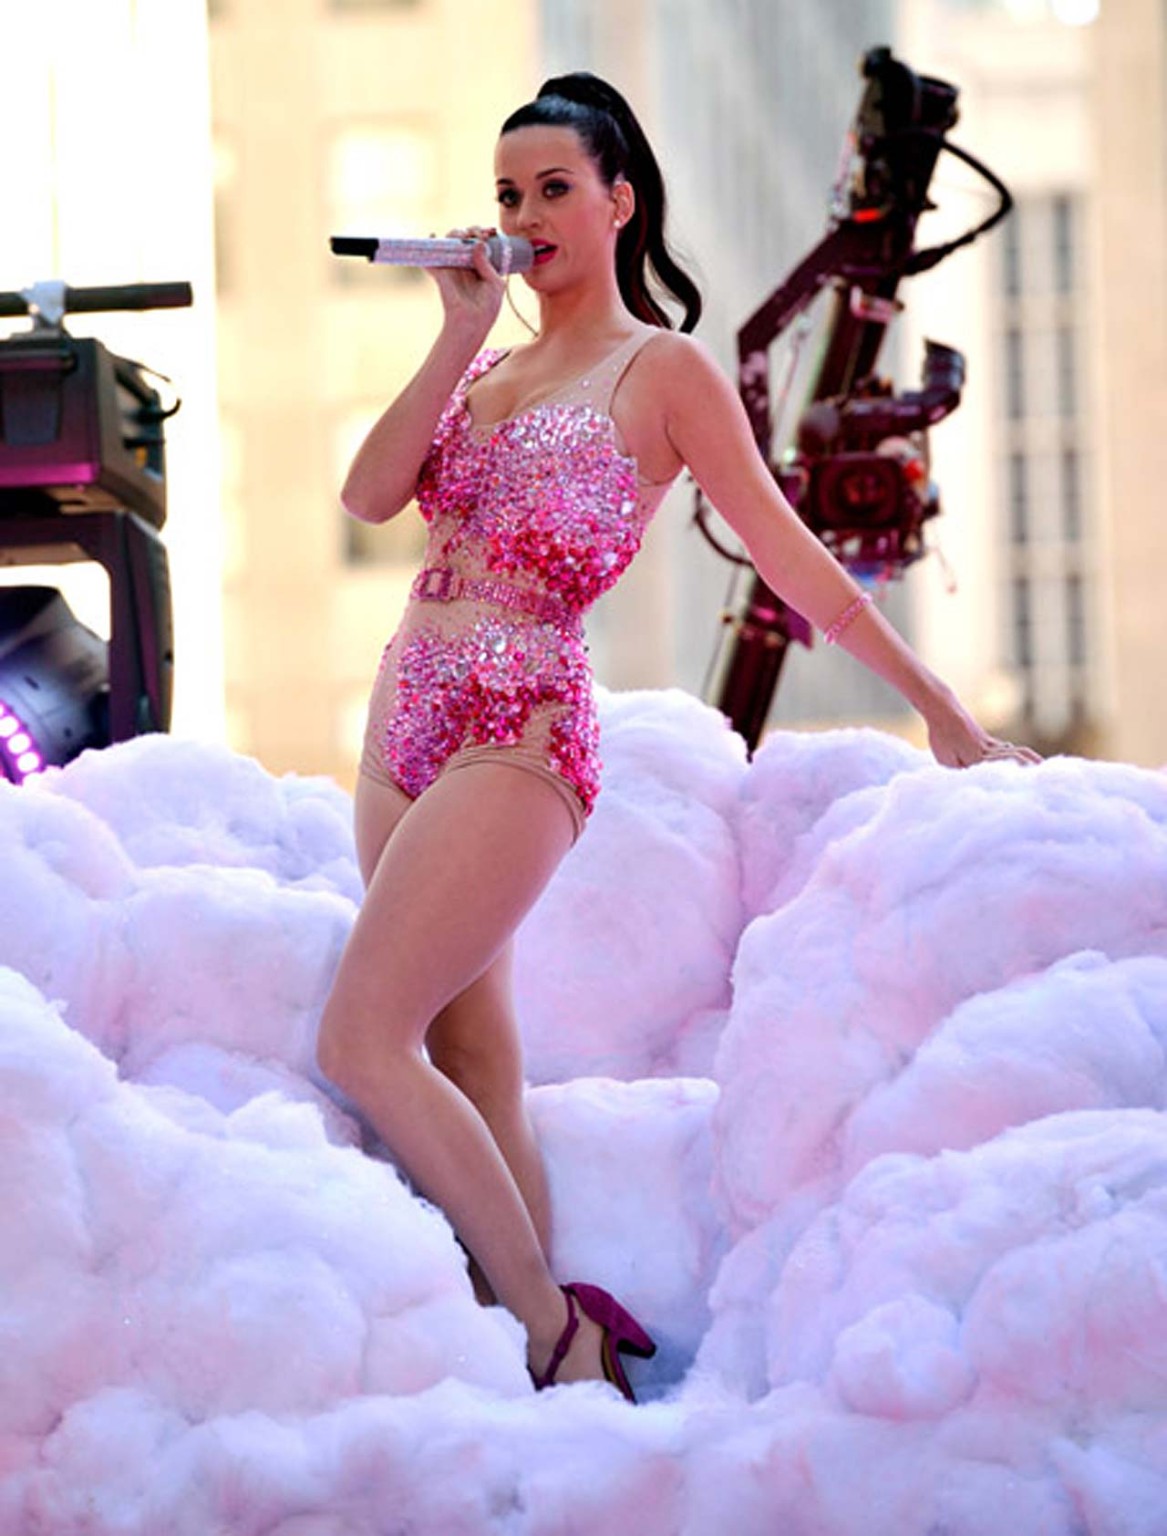 Katy Perry slight upskirt and leggy in mini skirt on stage paparazzi shoots #75323628